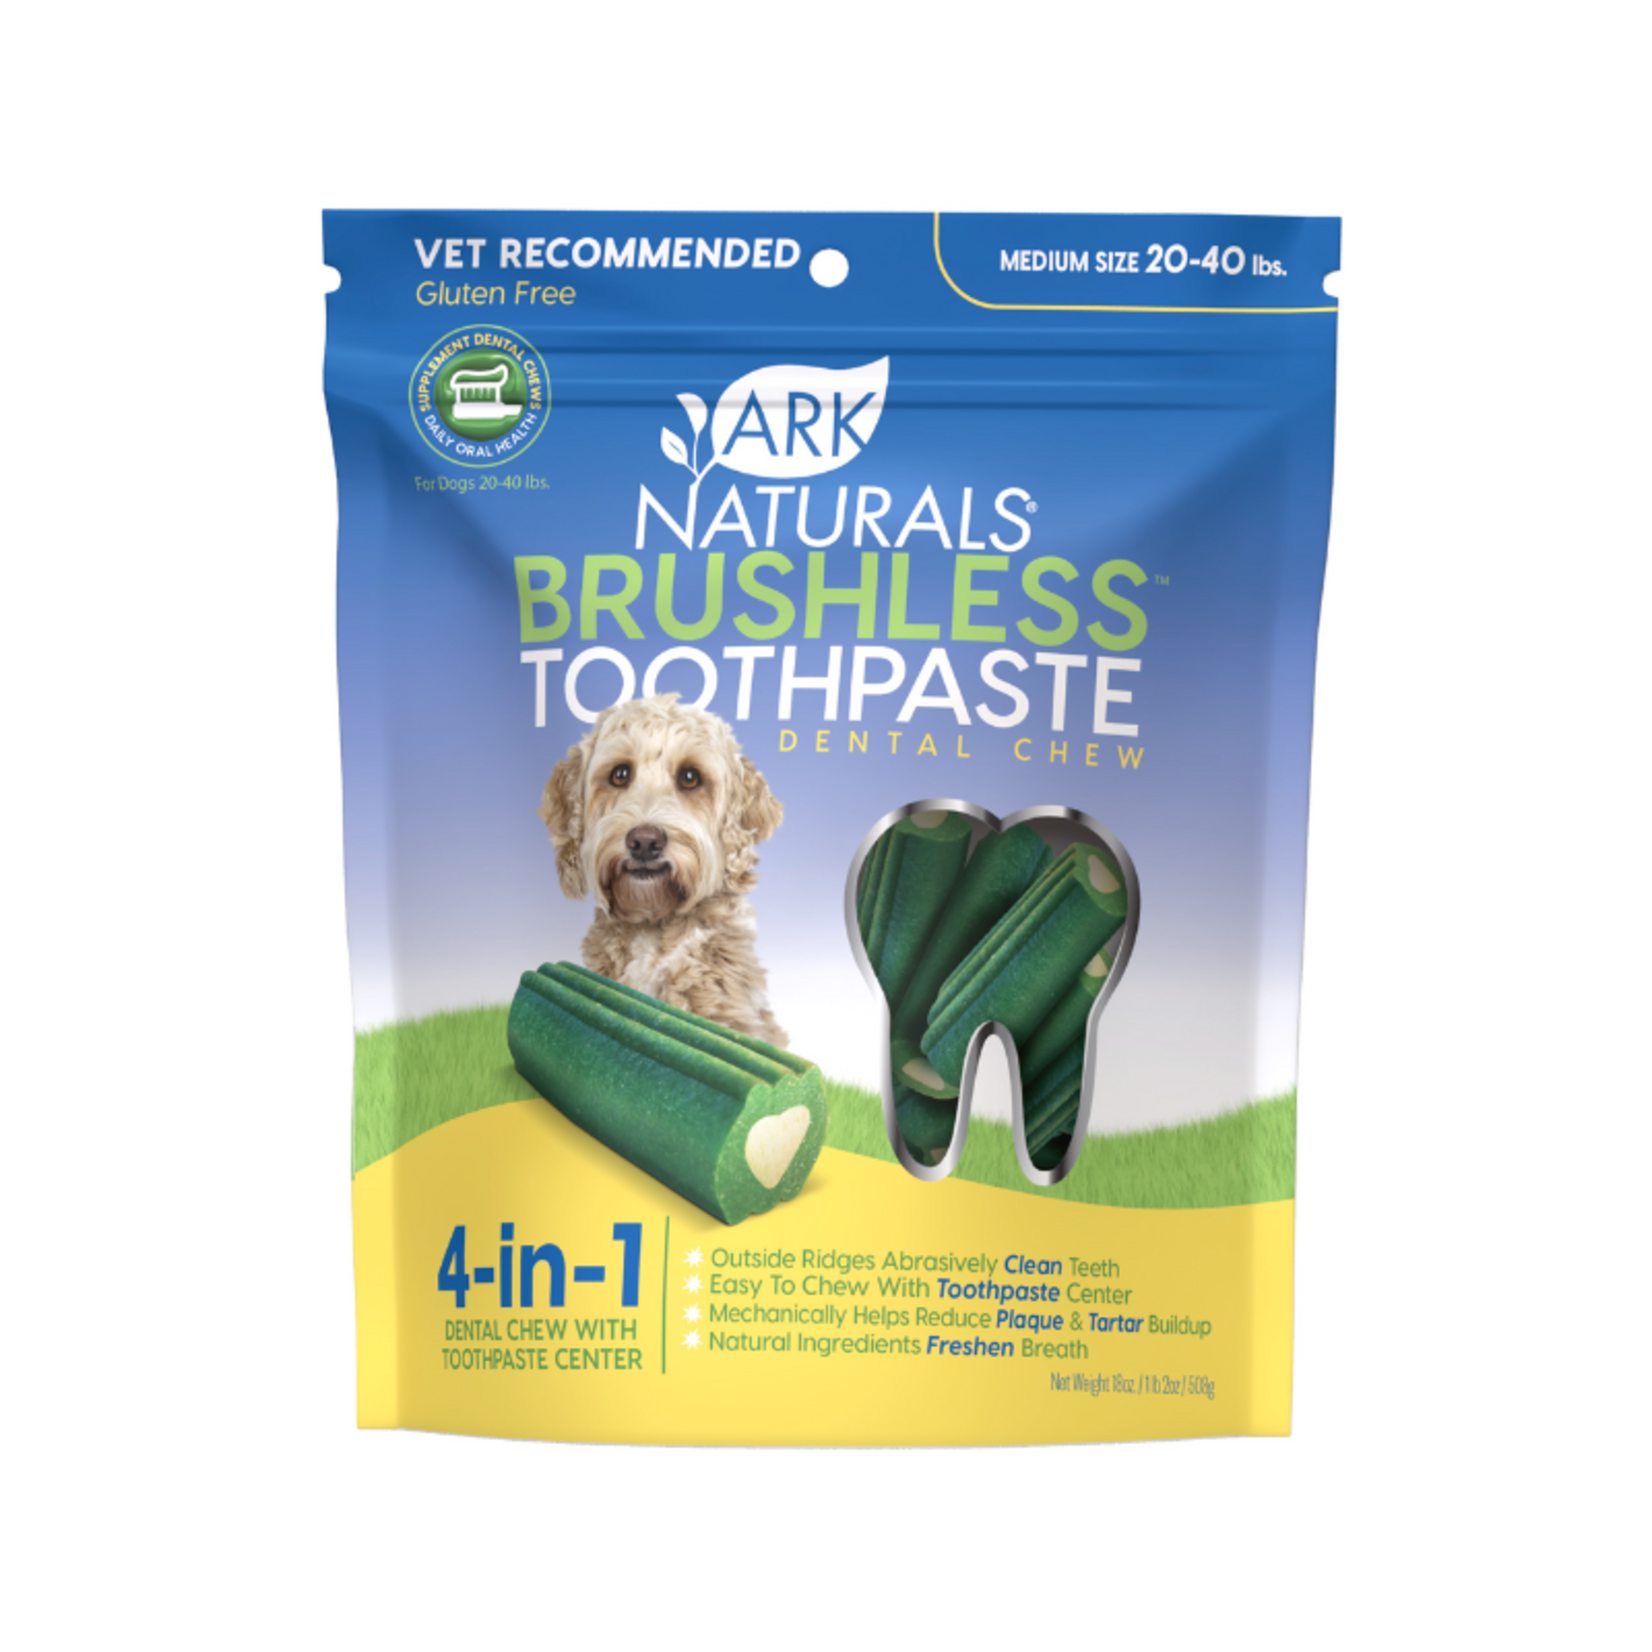 Ark Naturals 18 oz. - Dental Chews for Medium Dogs - Breath-Less Chewable Brushless Toothpaste - Ark Naturals